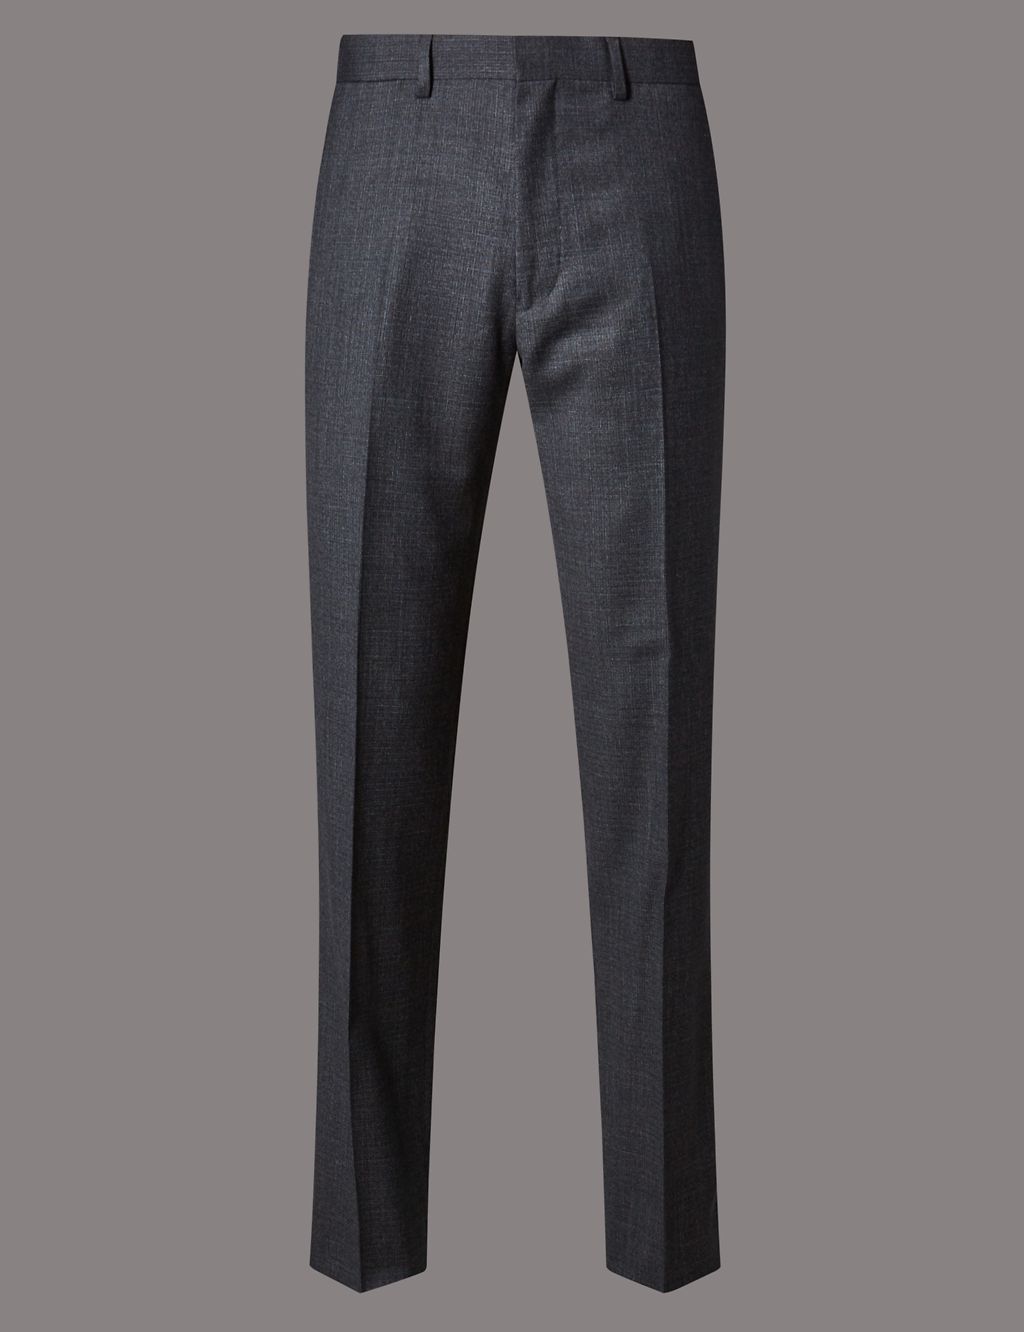 Charcoal Textured Tailored Wool Trousers 1 of 4